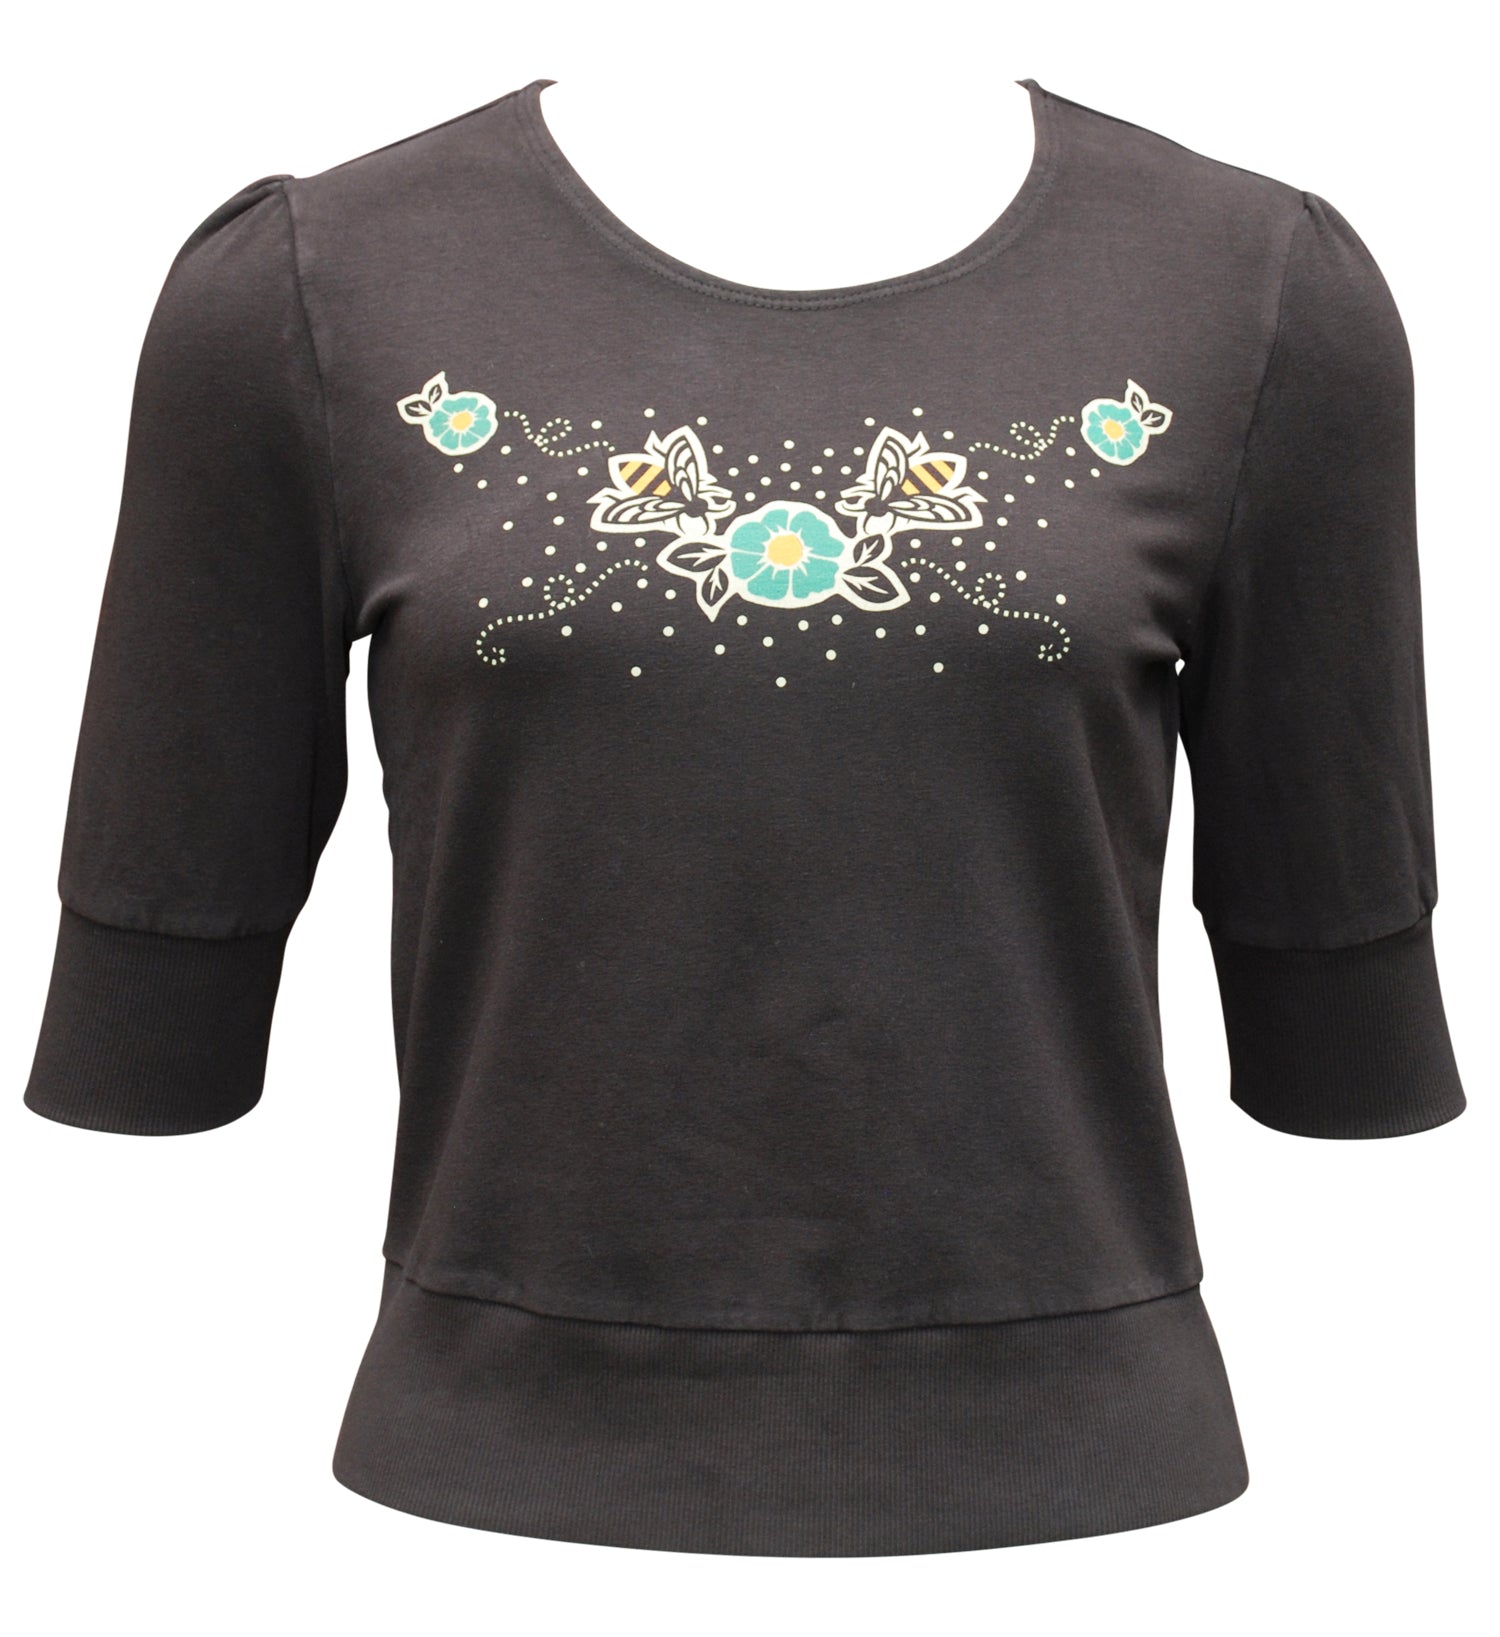 Dark brown French terry cropped top with honeybee and flower print